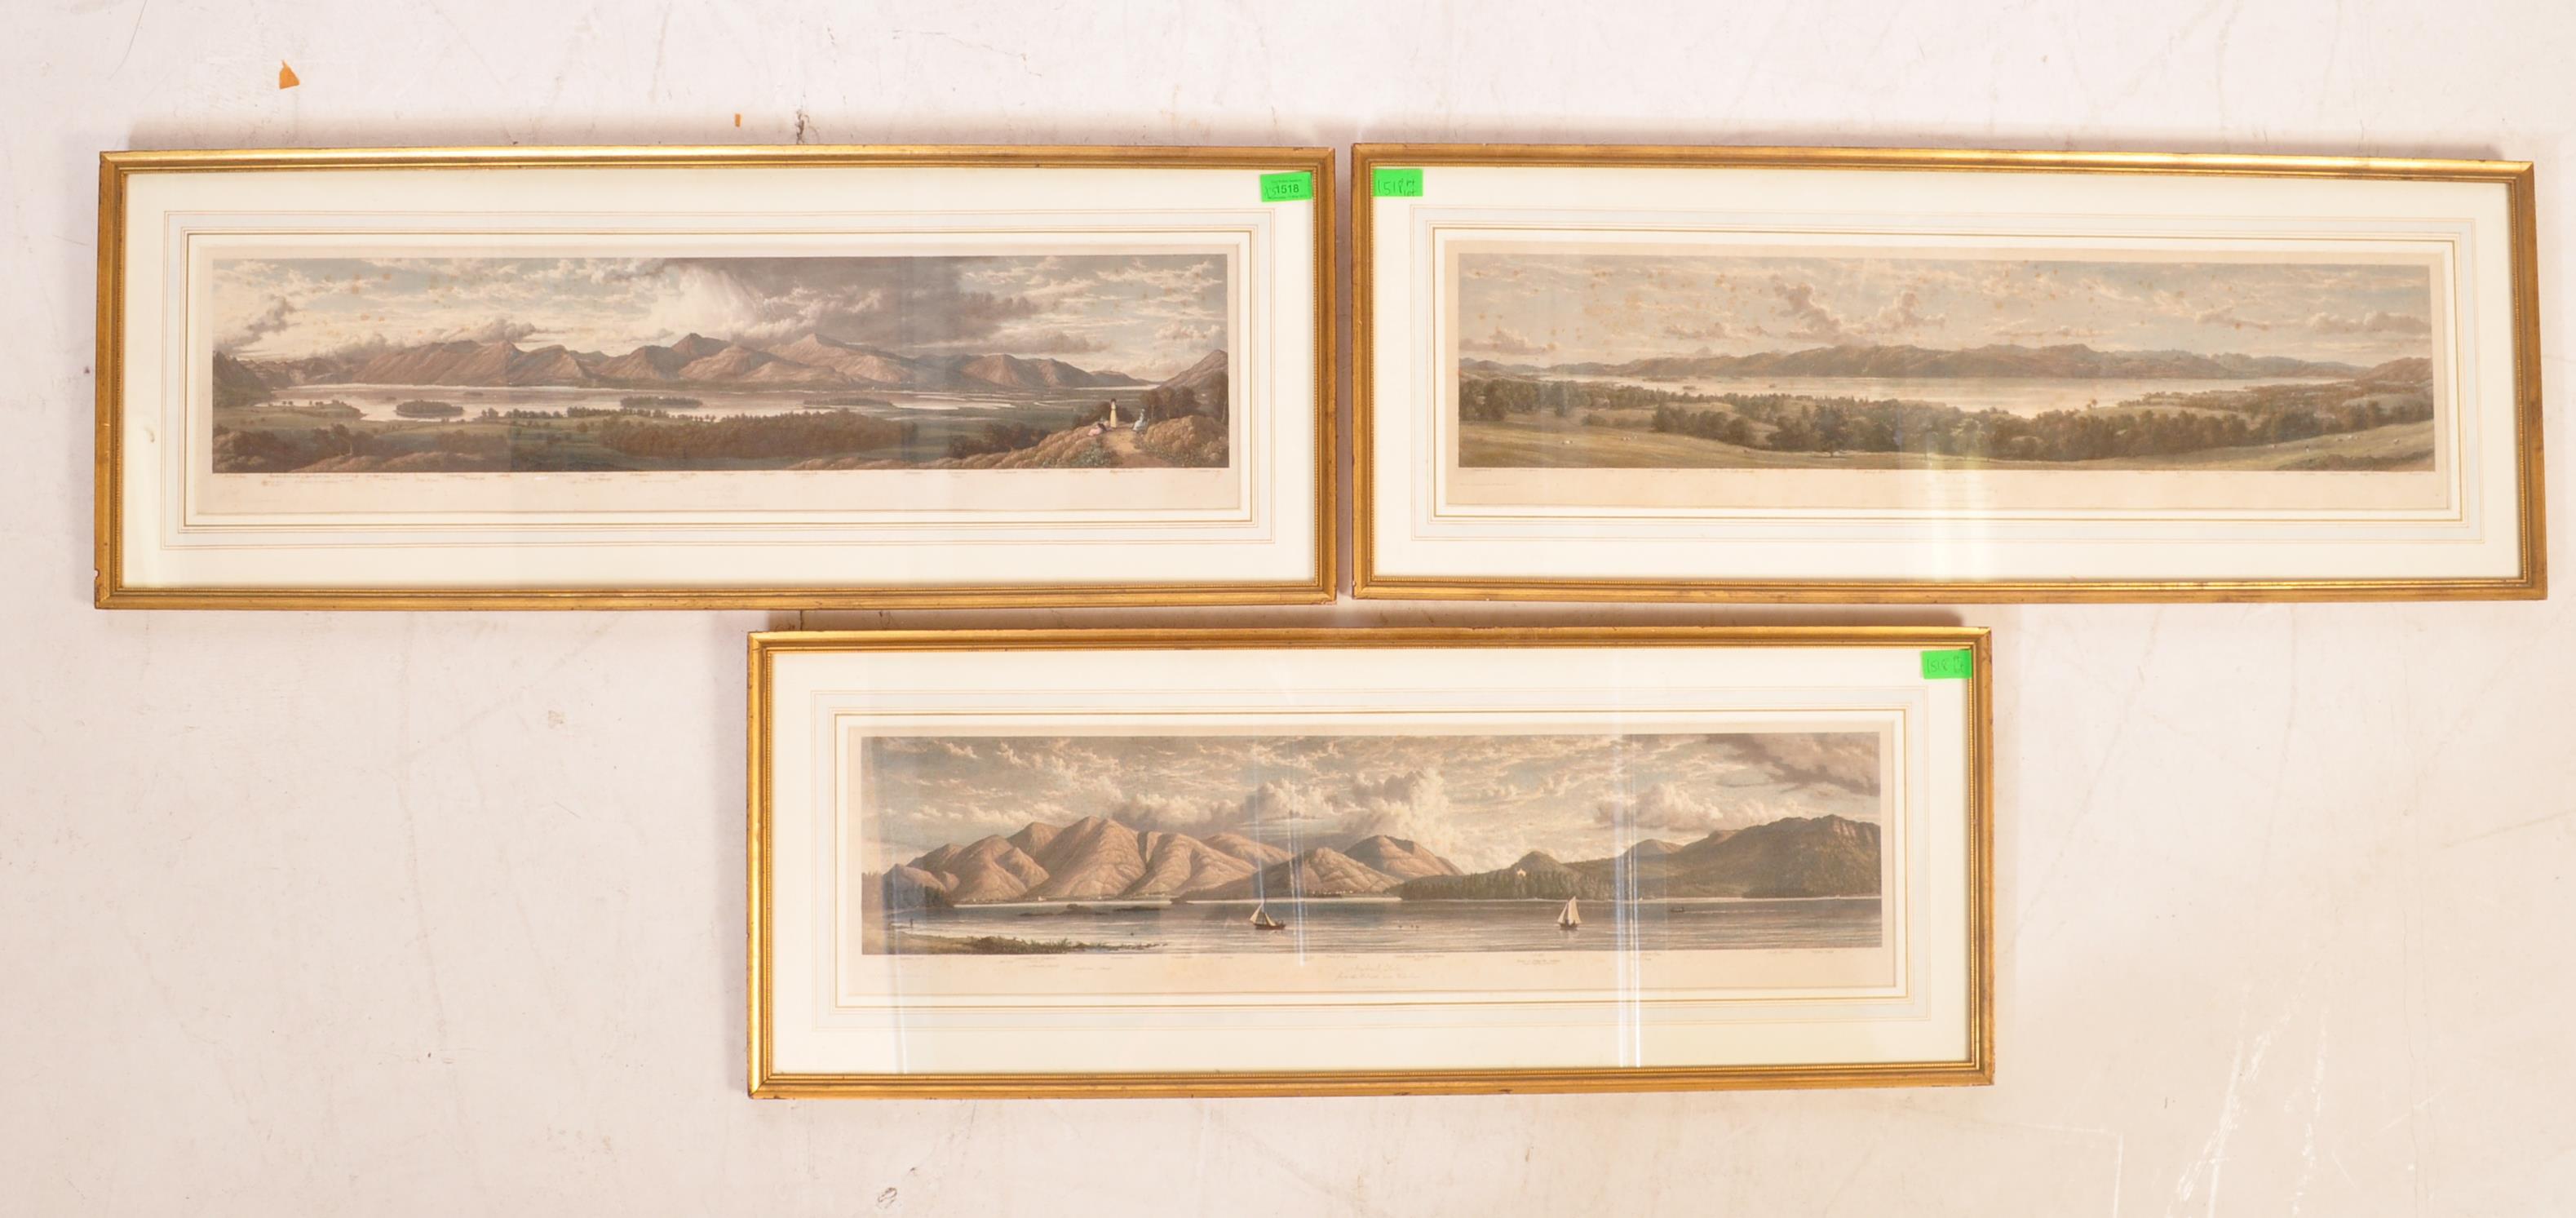 W WESTALL THREE 19TH CENTURY COLOUR ENGRAVINGS OF LAKE DISTRICT